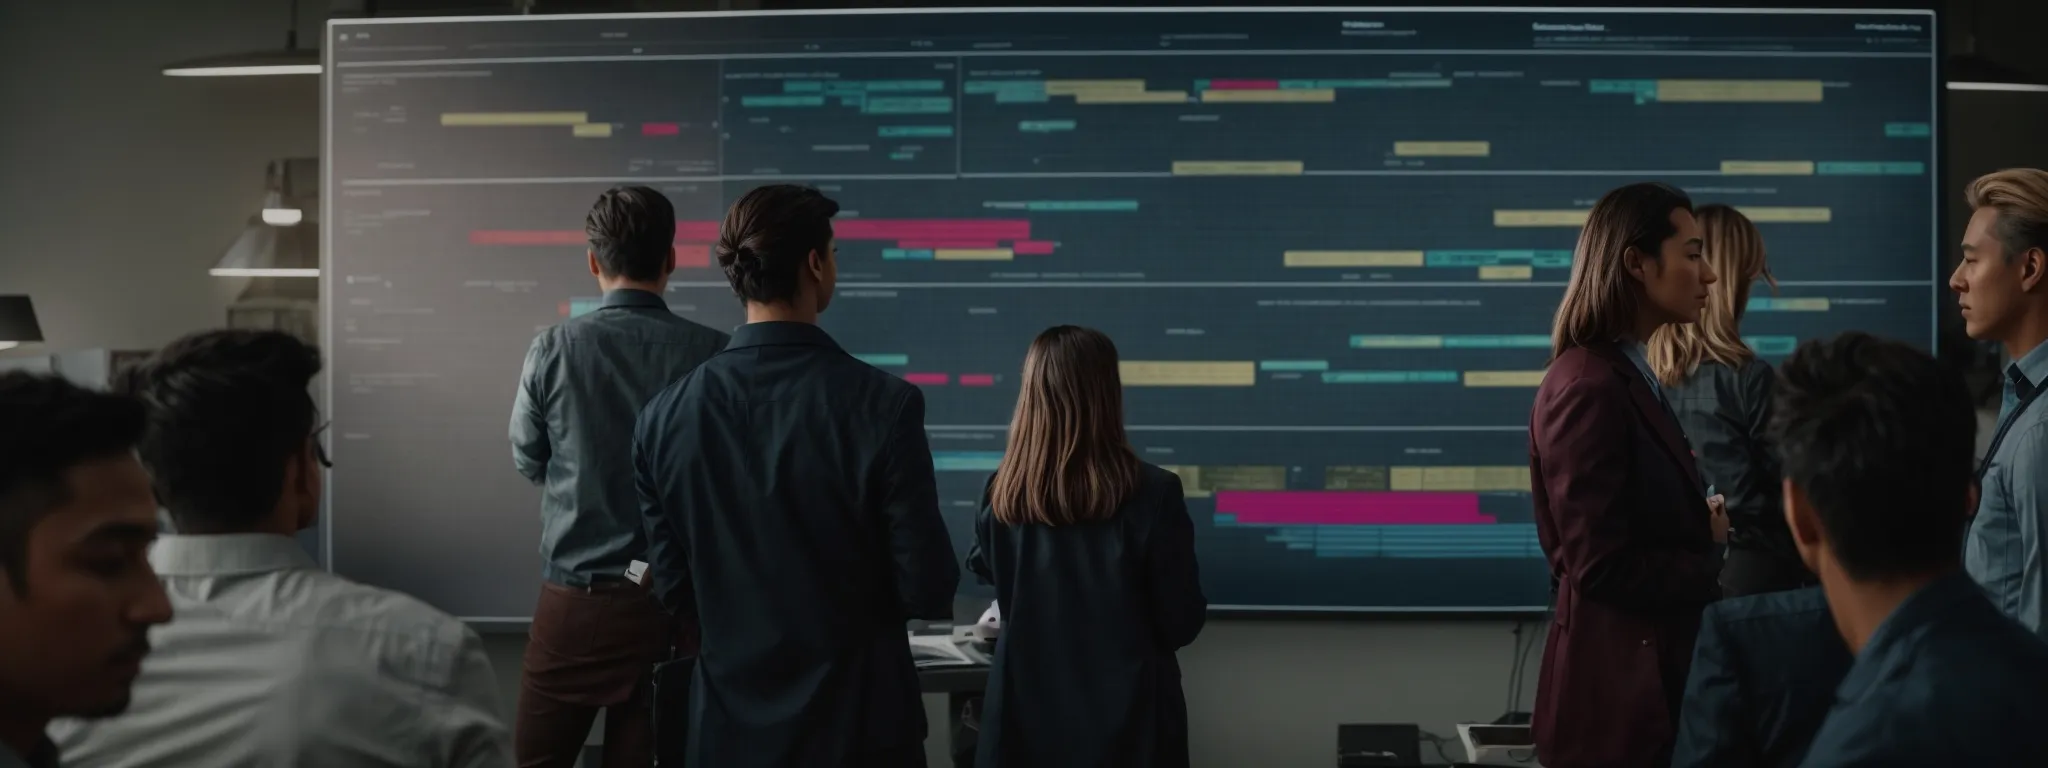 a team of professionals gathers around a large screen displaying colorful project timelines and task lists.